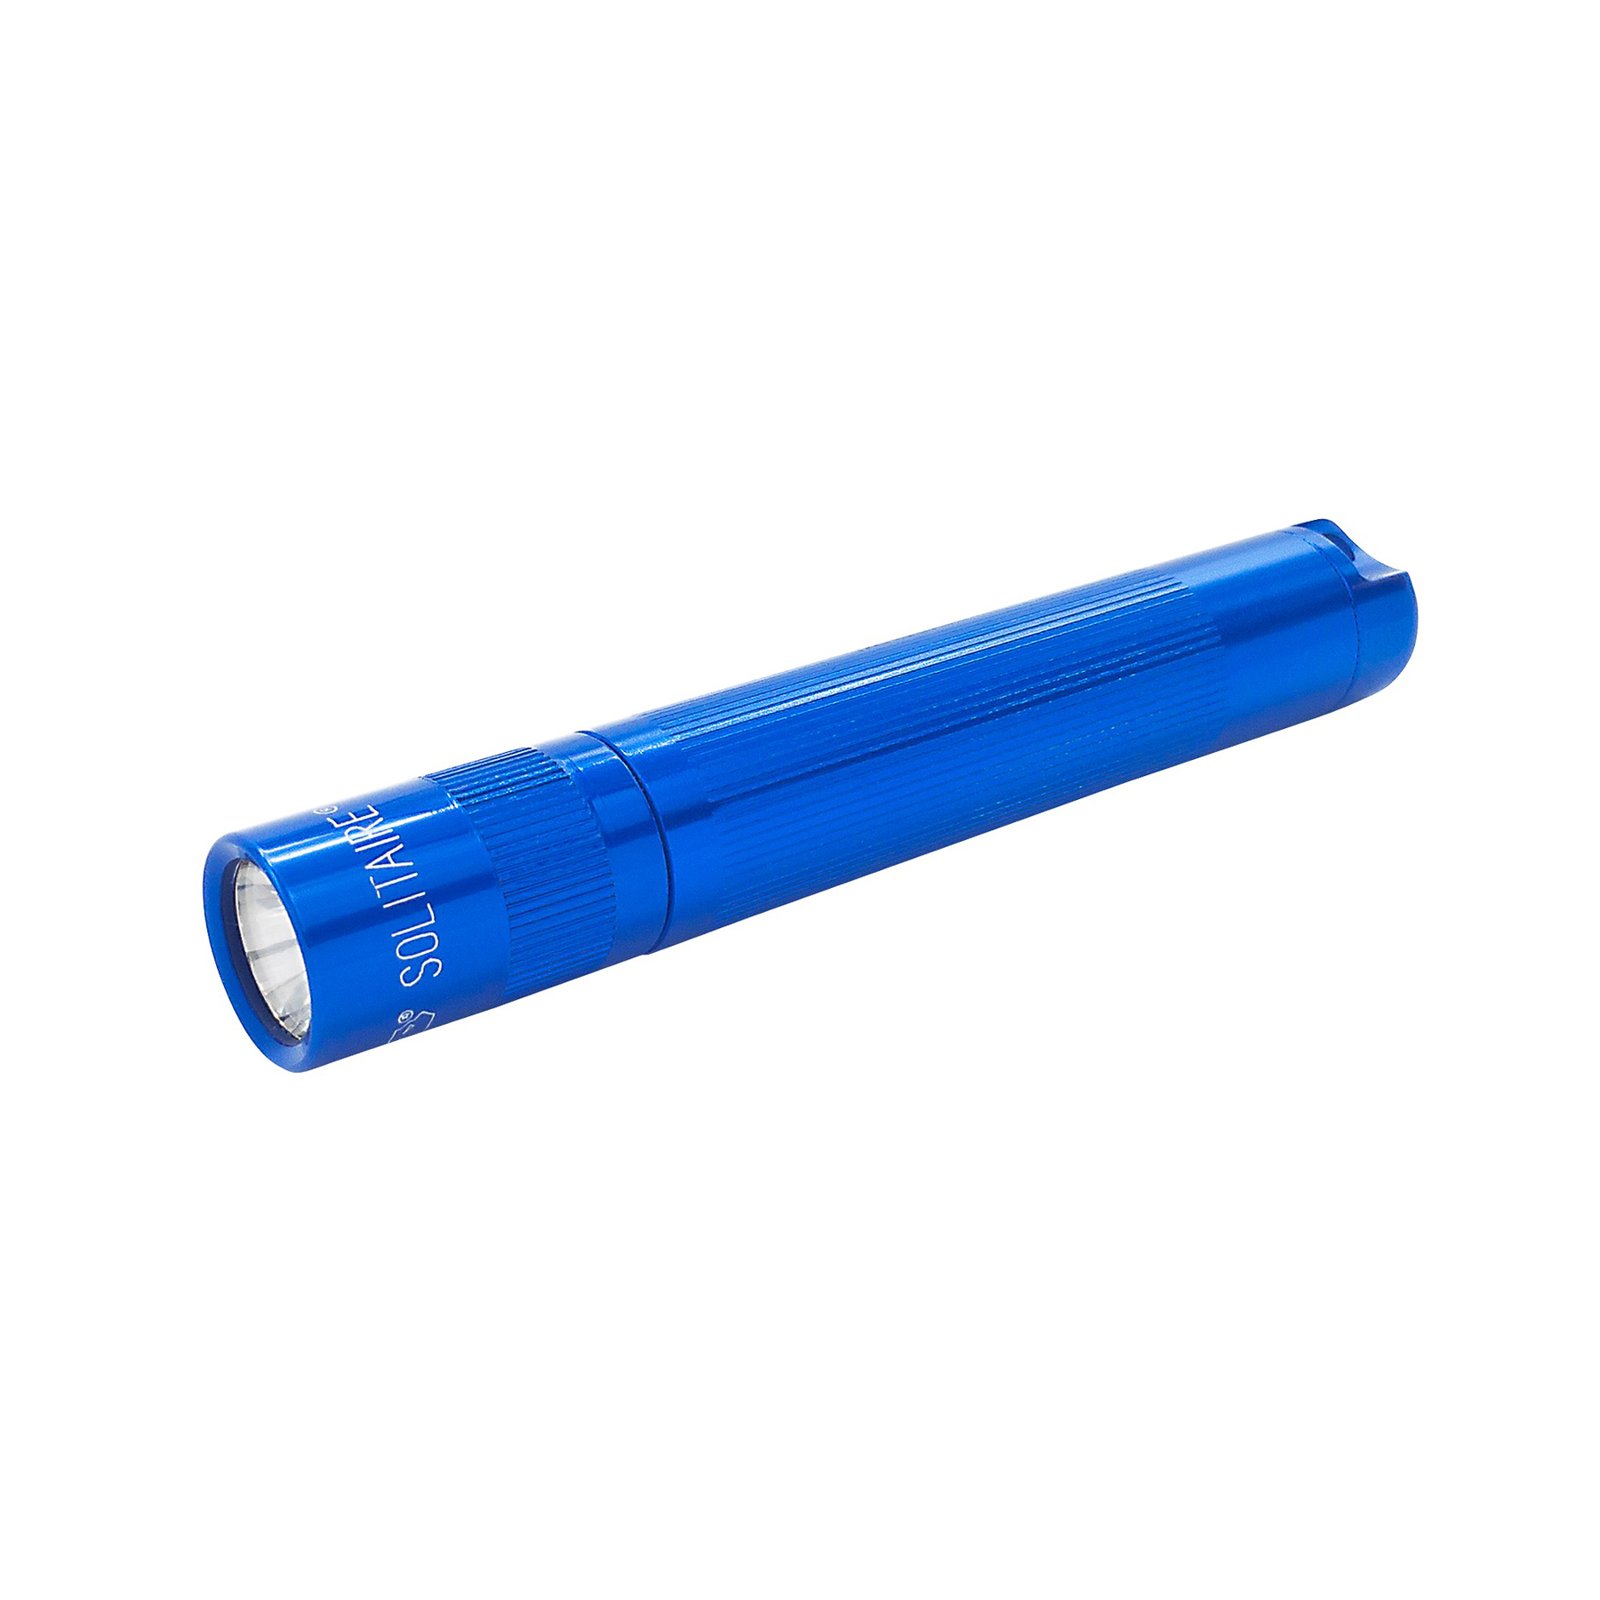 Maglite LED-Taschenlampe Solitaire, 1-Cell AAA, blau